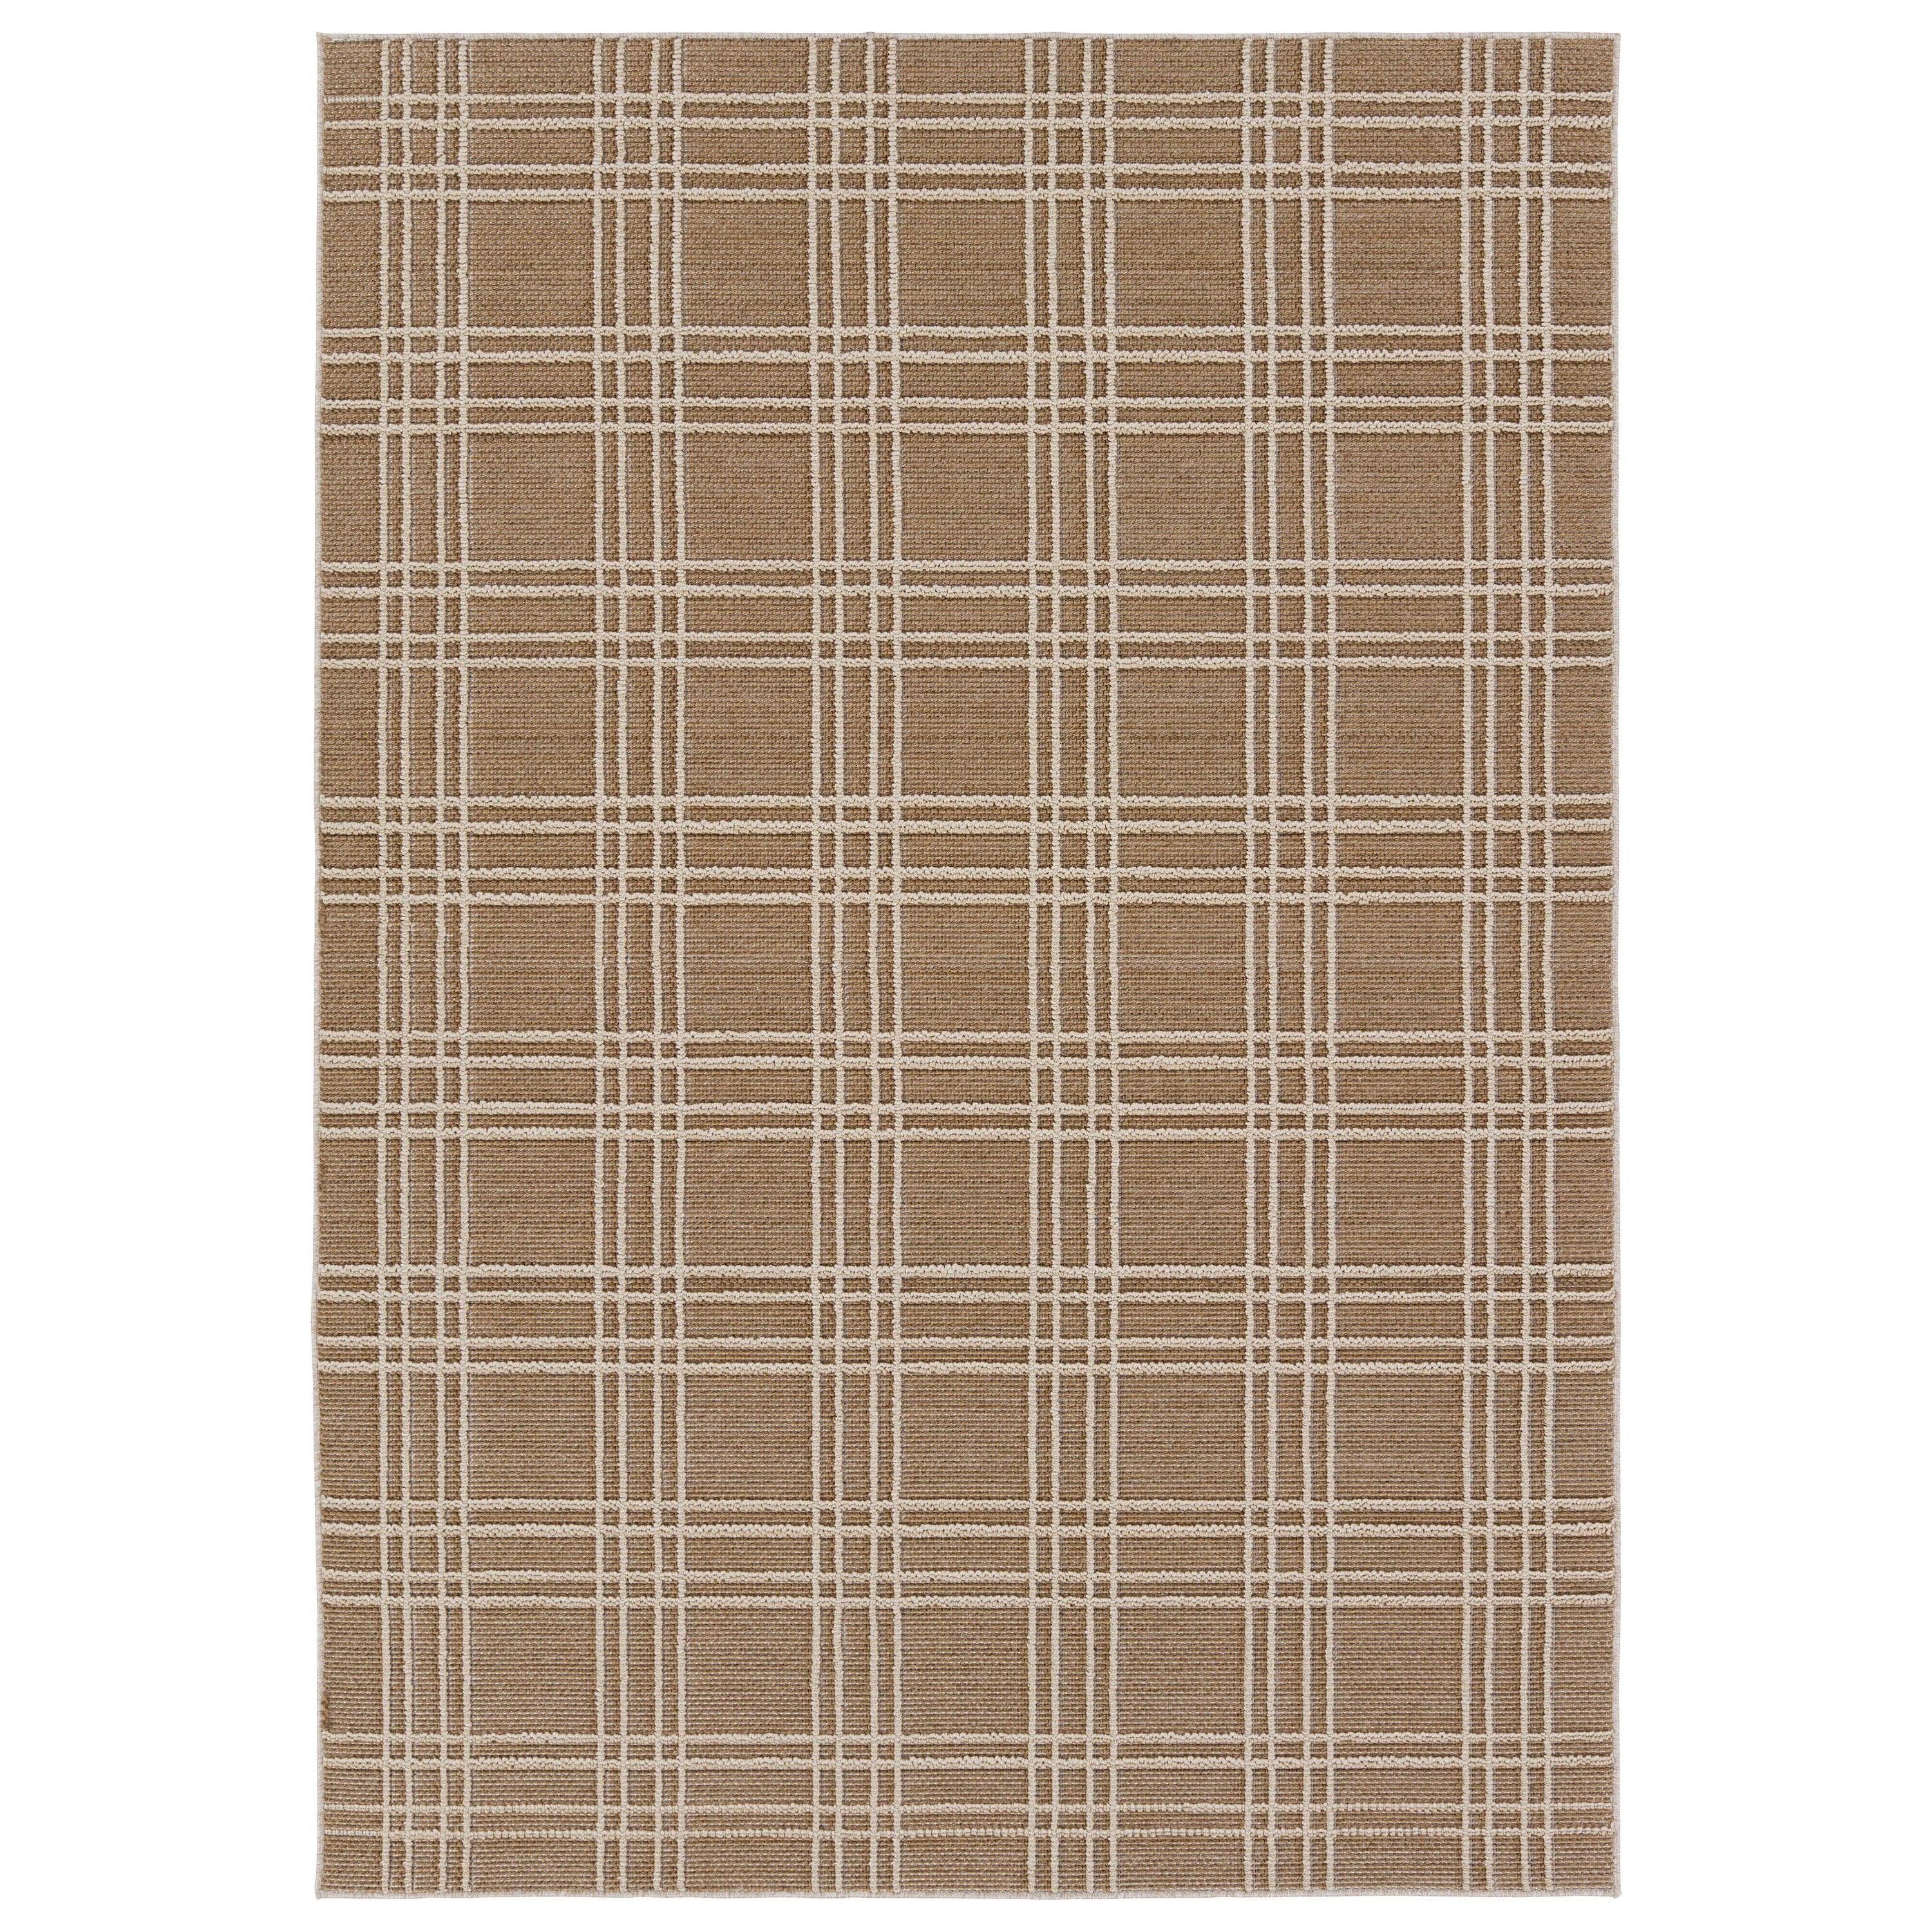 The indoor-outdoor Paradizo collection features durable, weather-resistant fibers that create a flatwoven, natural look. Emanating the colors and tone of grass fibers, the Barrett rug boasts a neutral, grounding palette. The textural grid design paired with the colorway of brown and cream highlight the easily styled nature of this accent piece. Amethyst Home provides interior design, new home construction design consulting, vintage area rugs, and lighting in the Salt Lake City metro area.